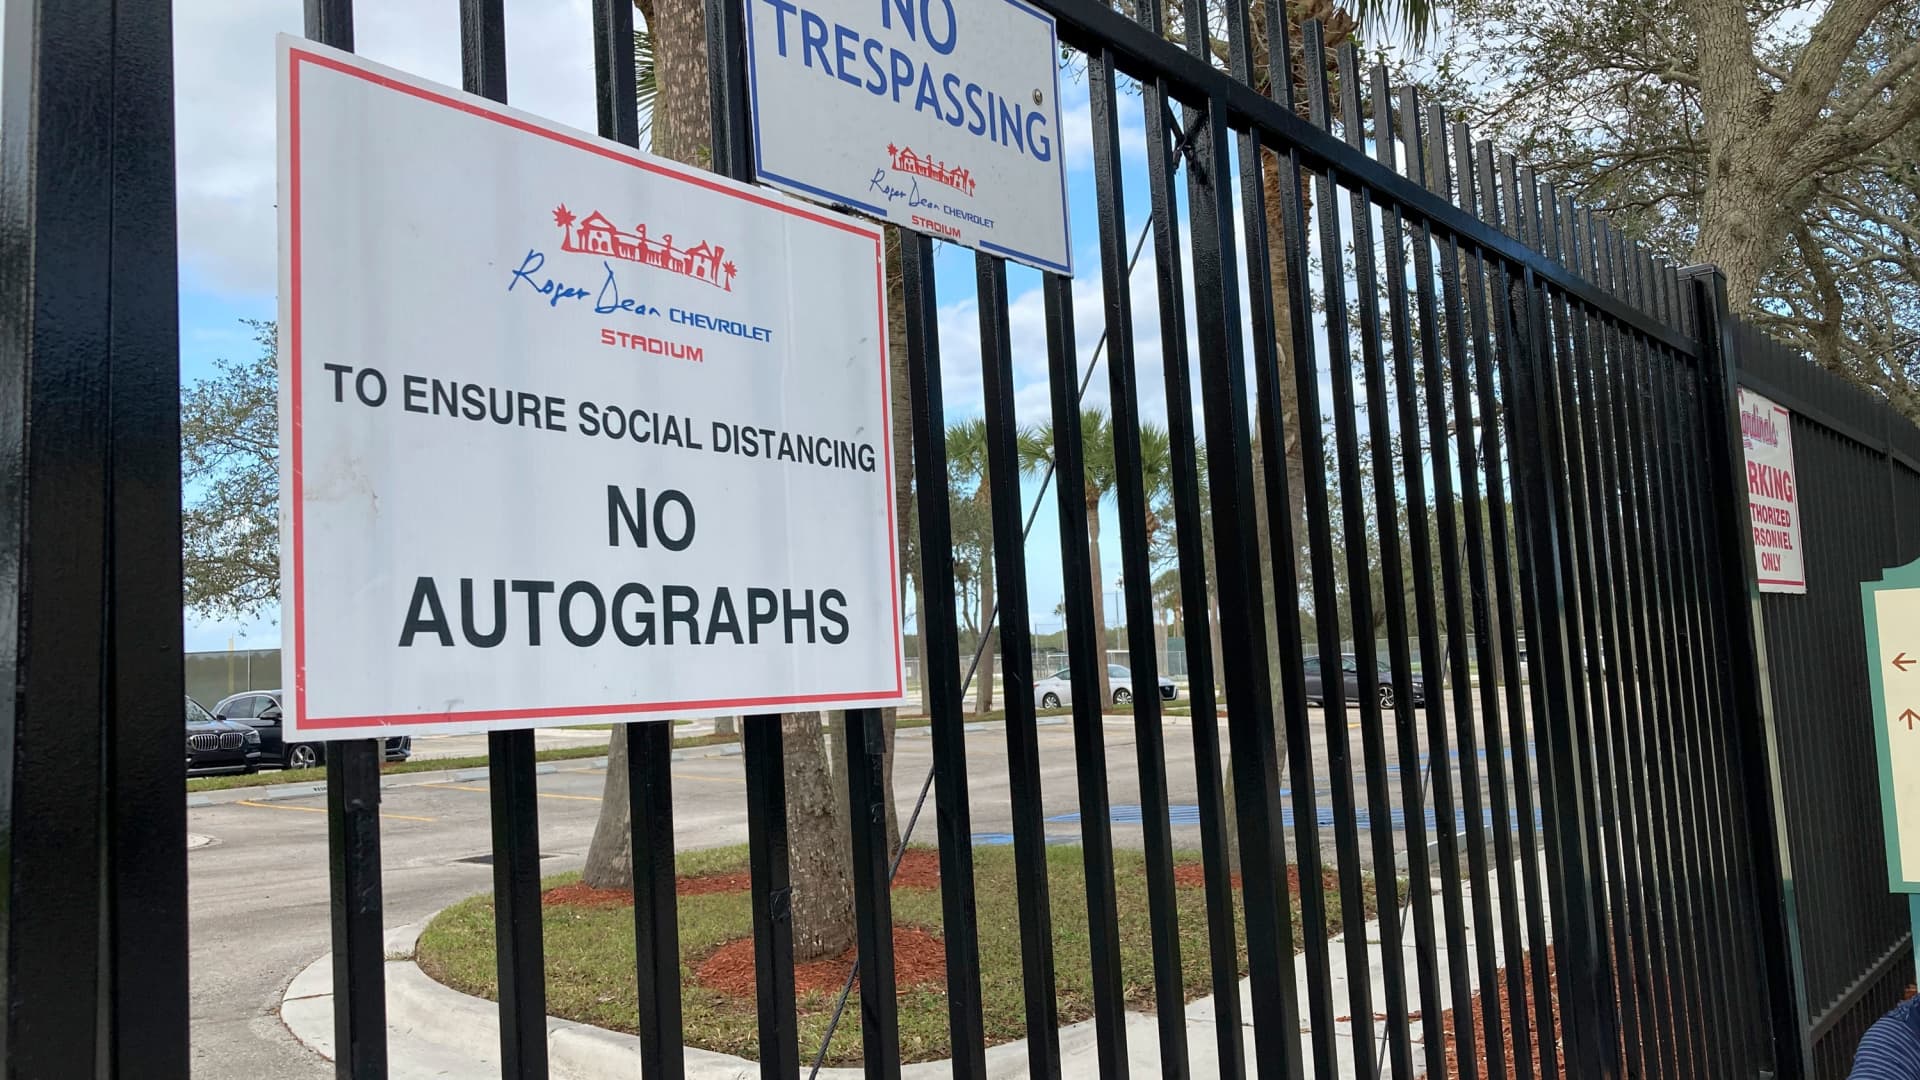 Signs are posted outside Roger Dean Stadium in Jupiter, Fla., Monday, Feb. 21, 2022. Baseball labor negotiations moved to the spring training ballpark from New York as players and owners join the talks, which enter a more intensive phase with perhaps a week left to salvage opening day on March 31.